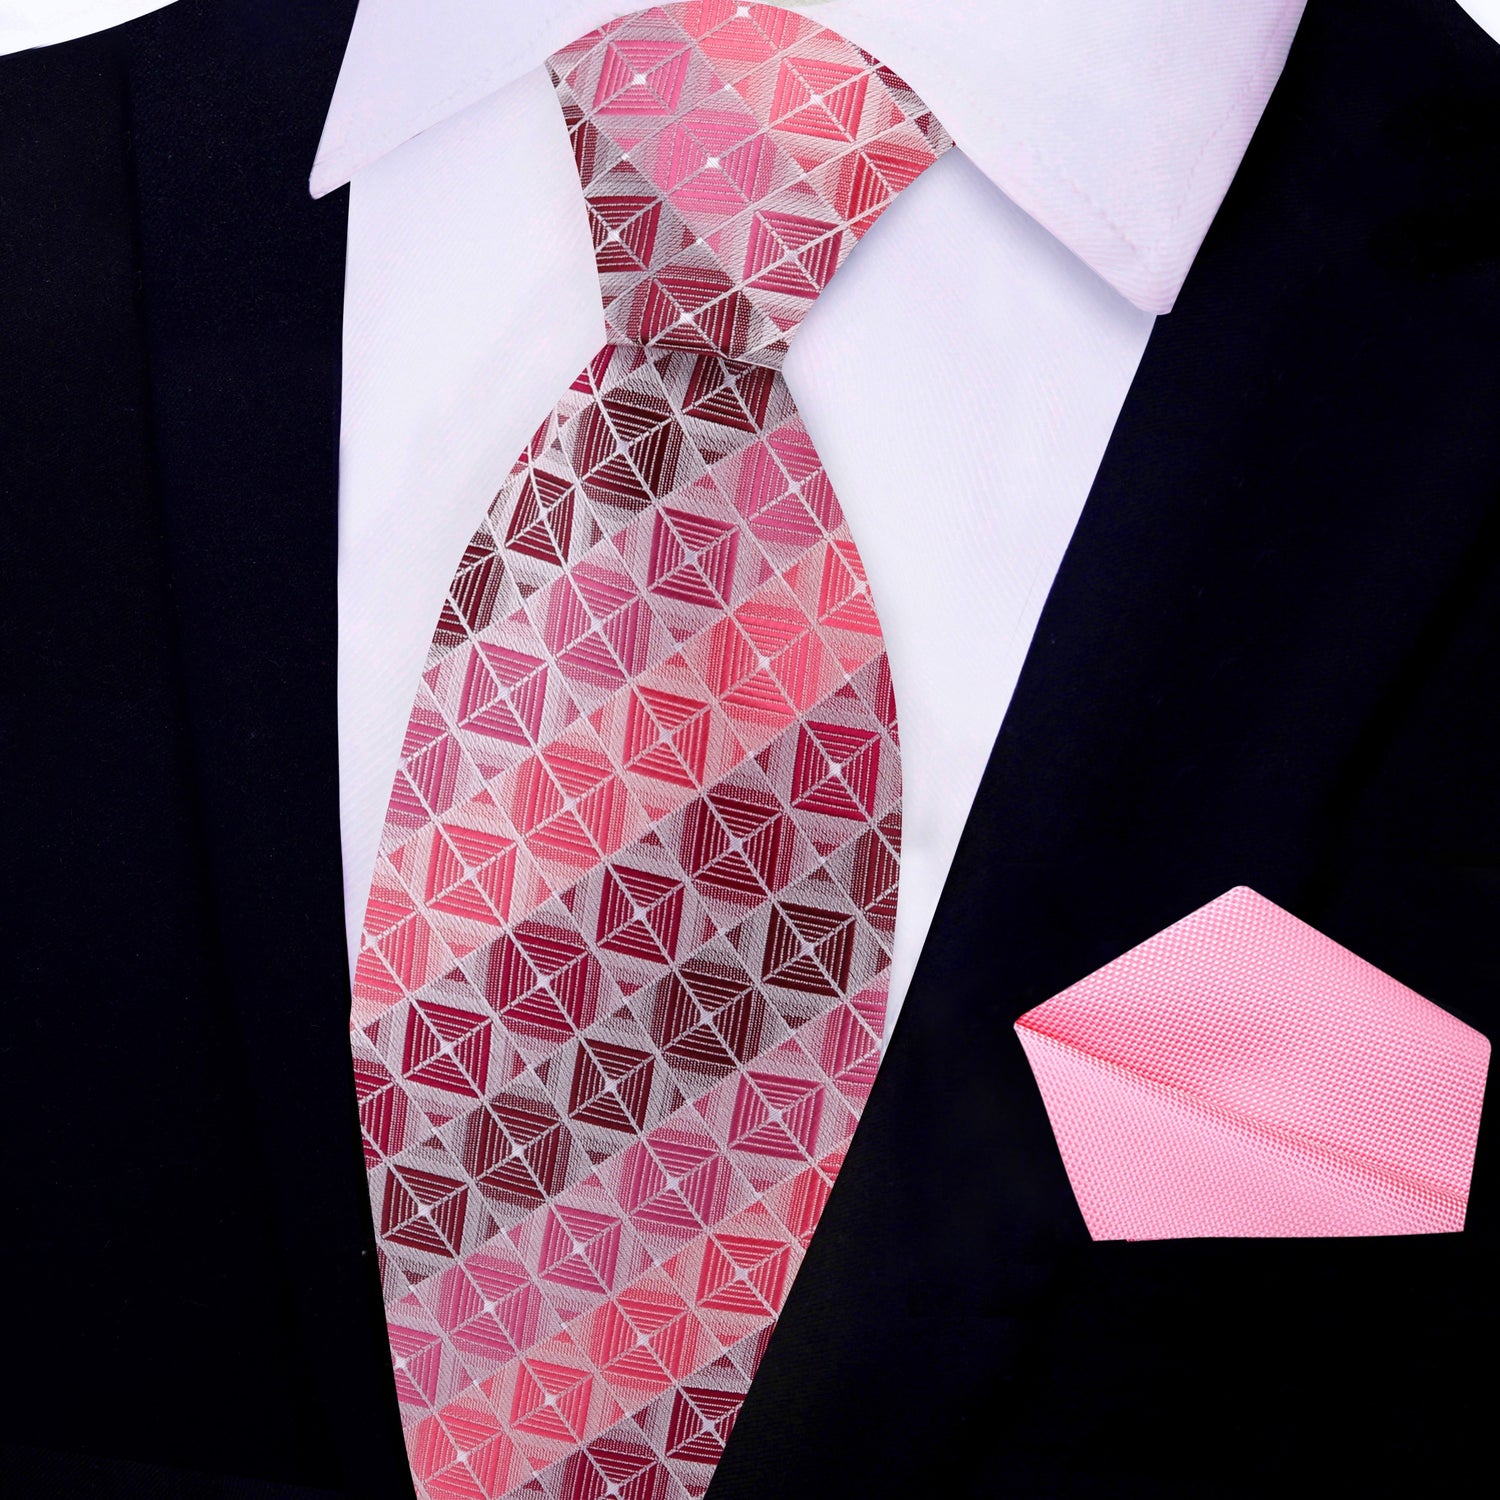 View 2: Shades of Pink and Red Geometric Blocks Necktie and Pink Pocket Square